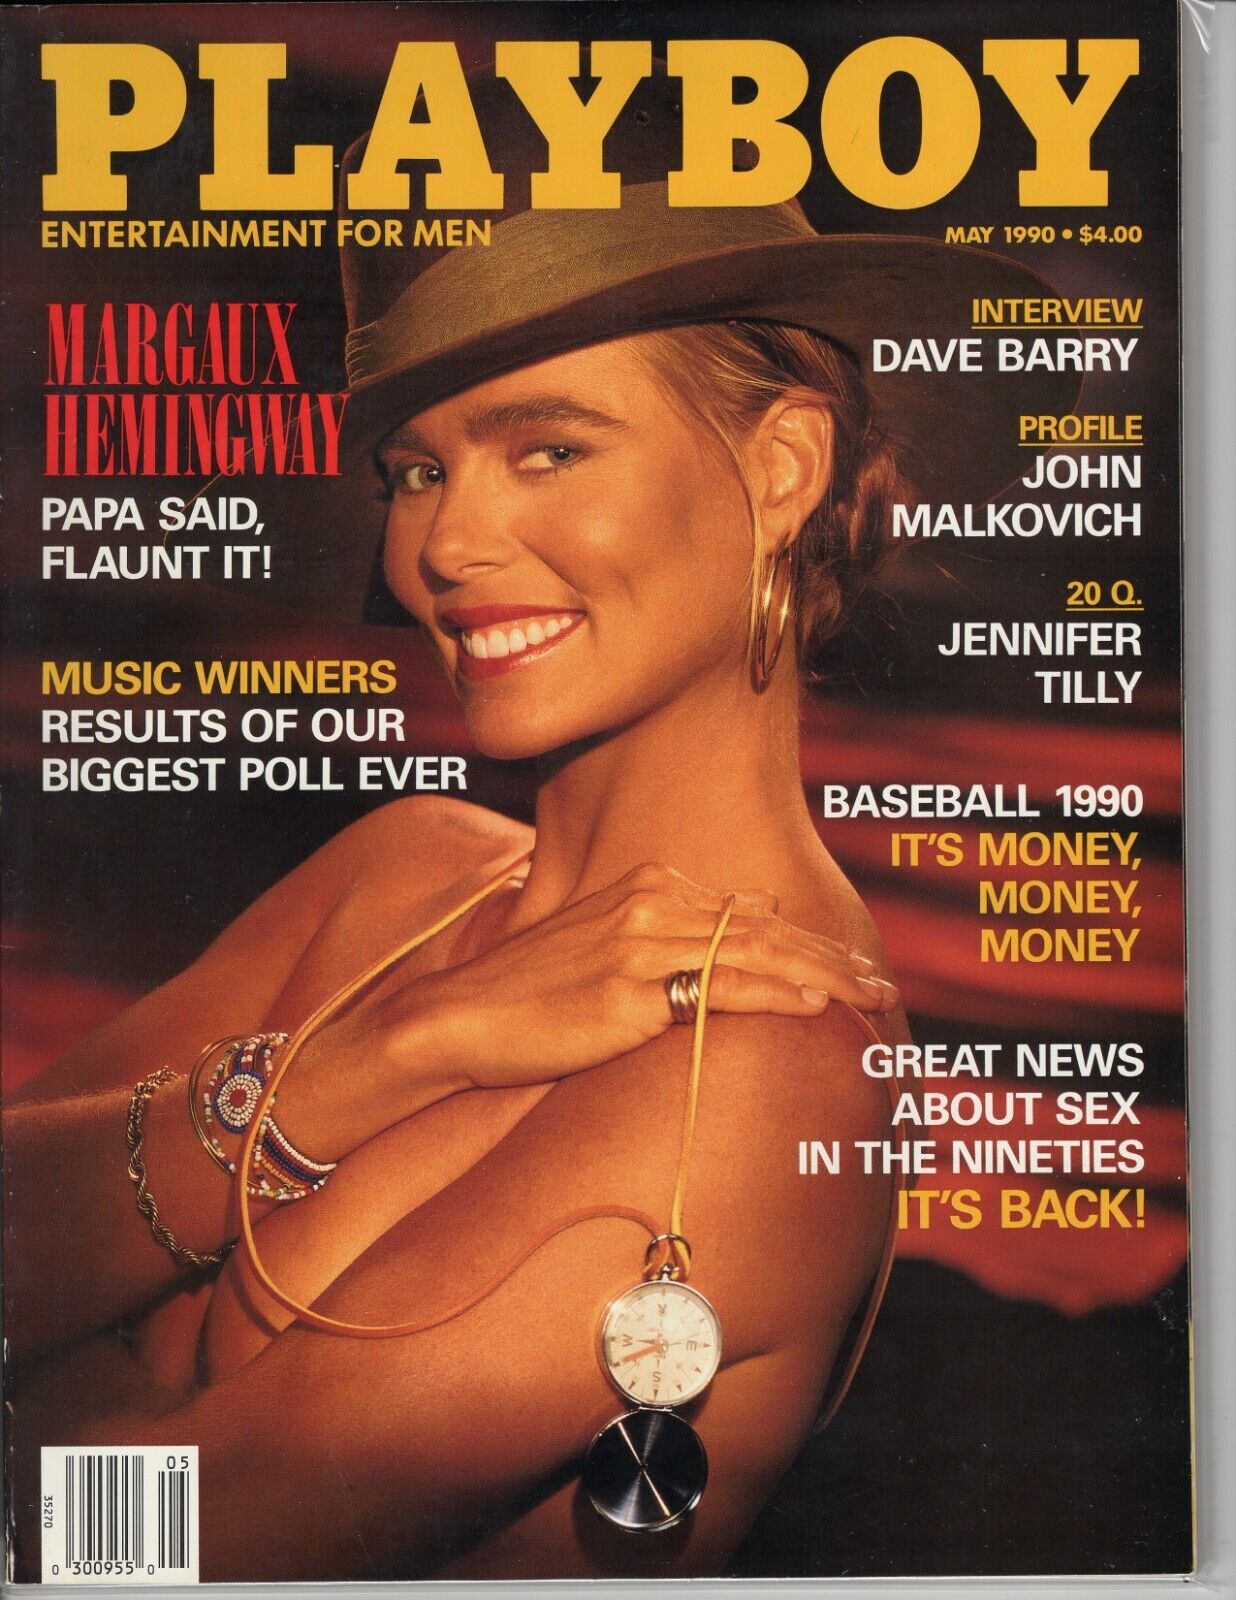 Playboy Magazines - 1990s - Excellent Condition - You Pick